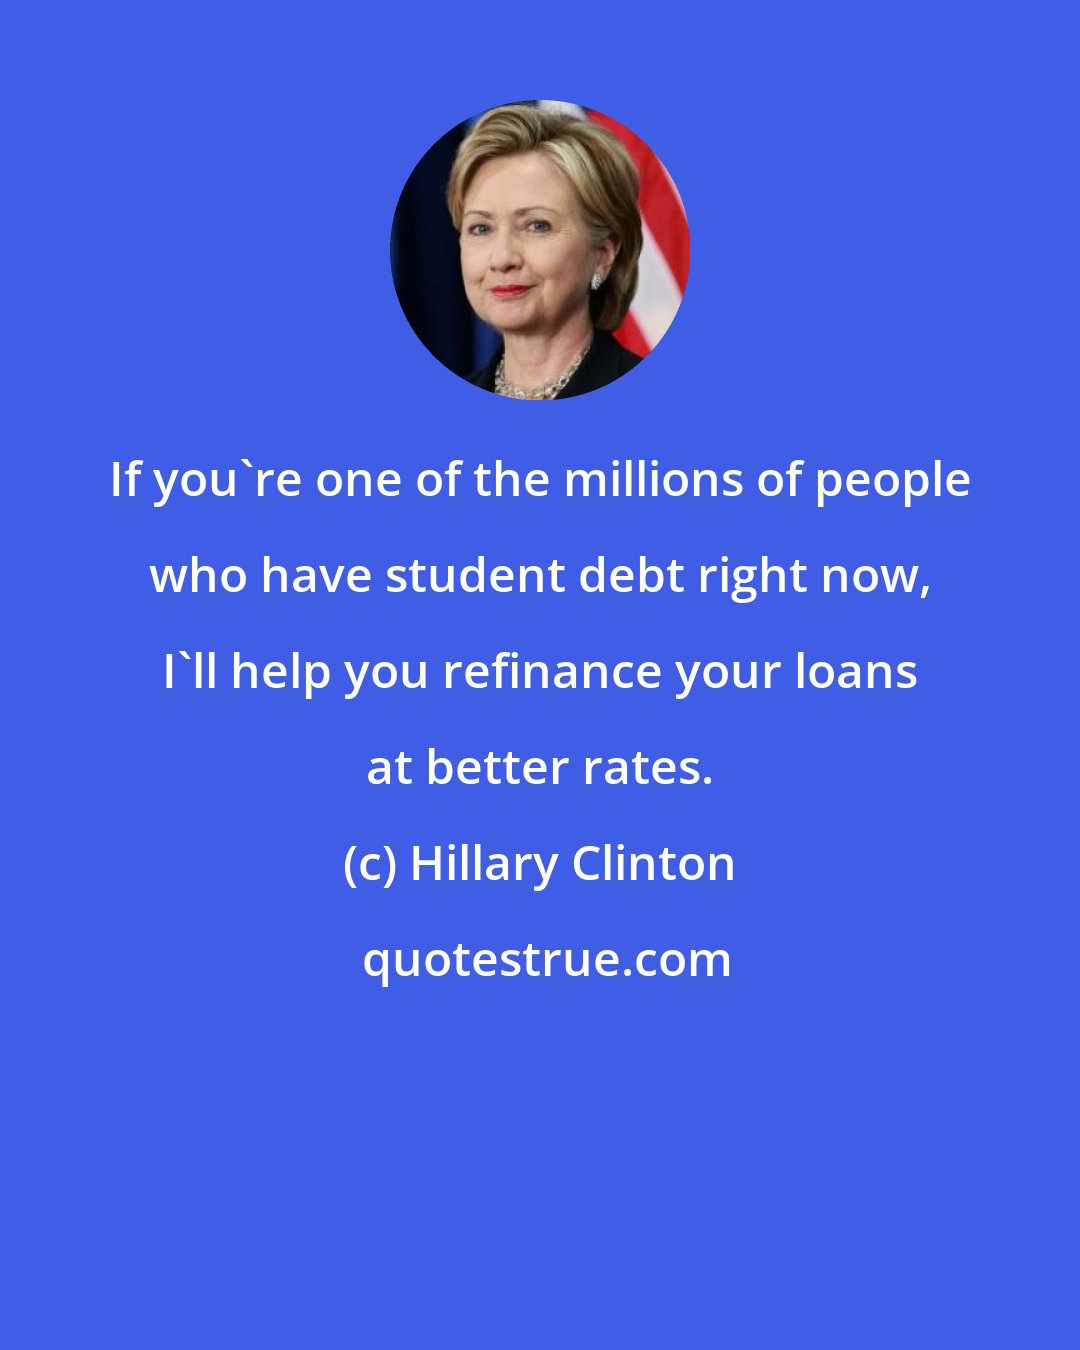 Hillary Clinton: If you're one of the millions of people who have student debt right now, I'll help you refinance your loans at better rates.